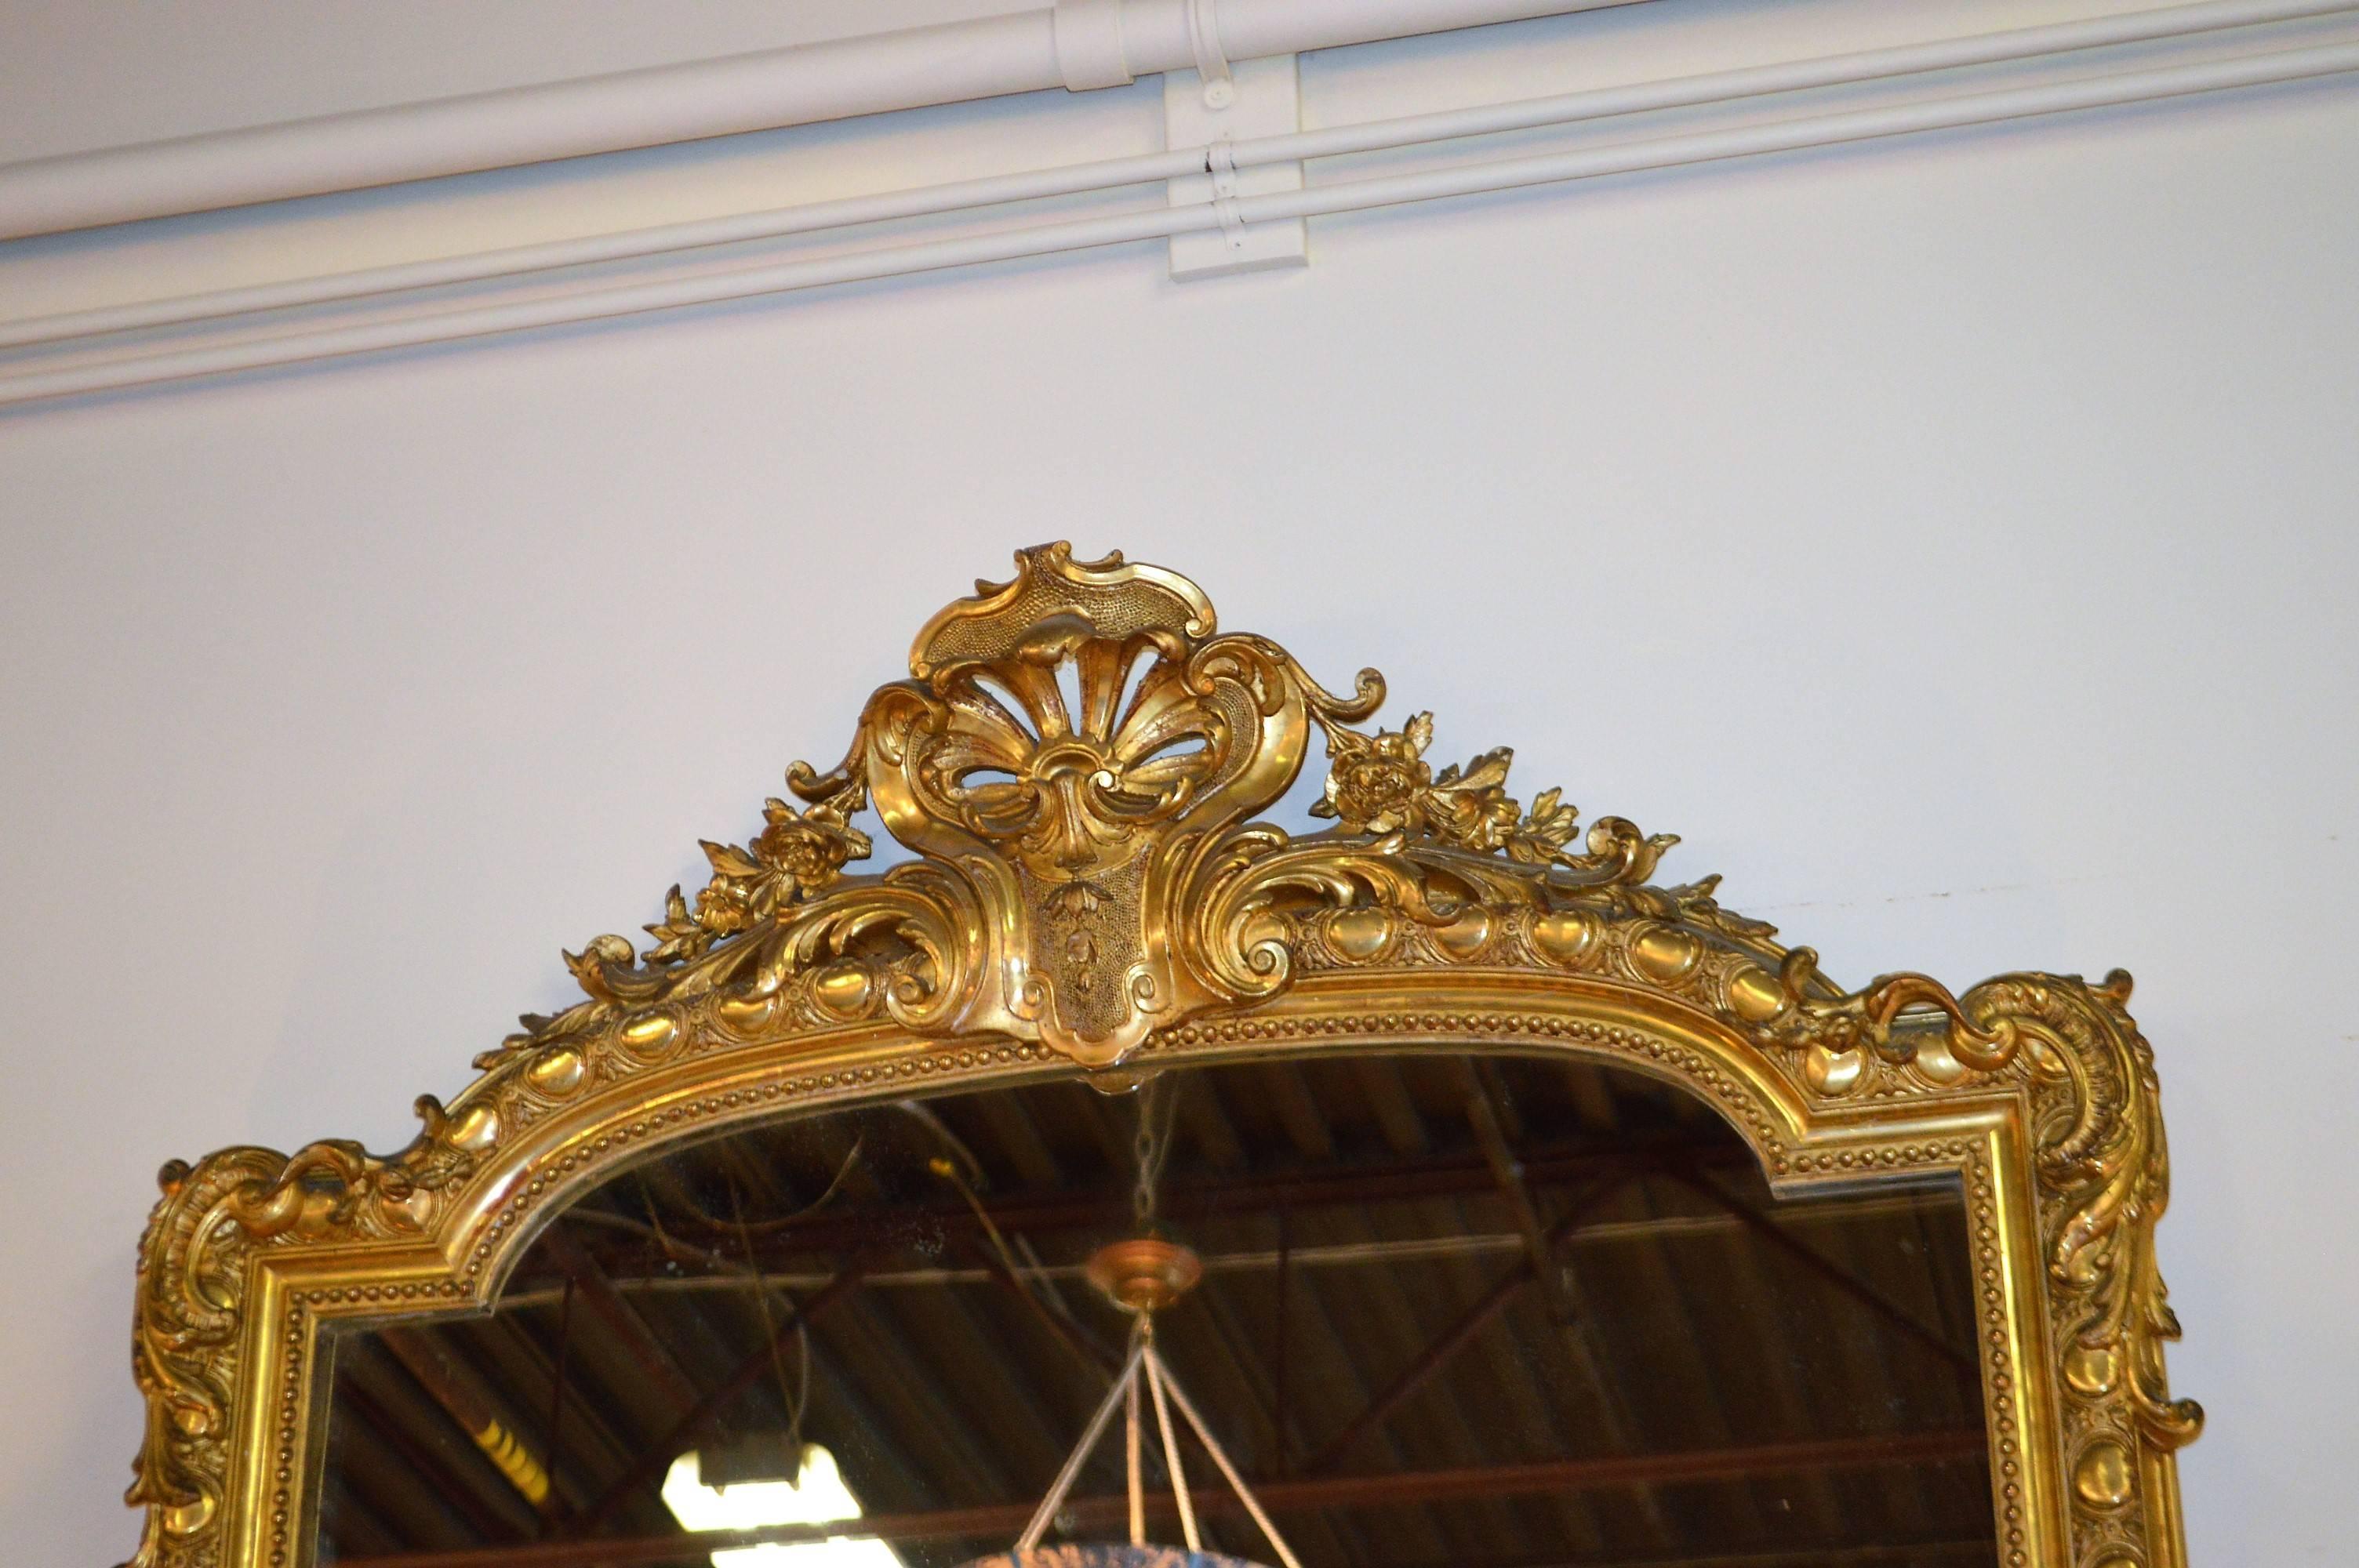 Stunning 19th century gilded on wood large mirror in the style of Louis XV with decorative shell and acanthus leaf design. An impressive and beautiful mirror and very good condition despite its age.